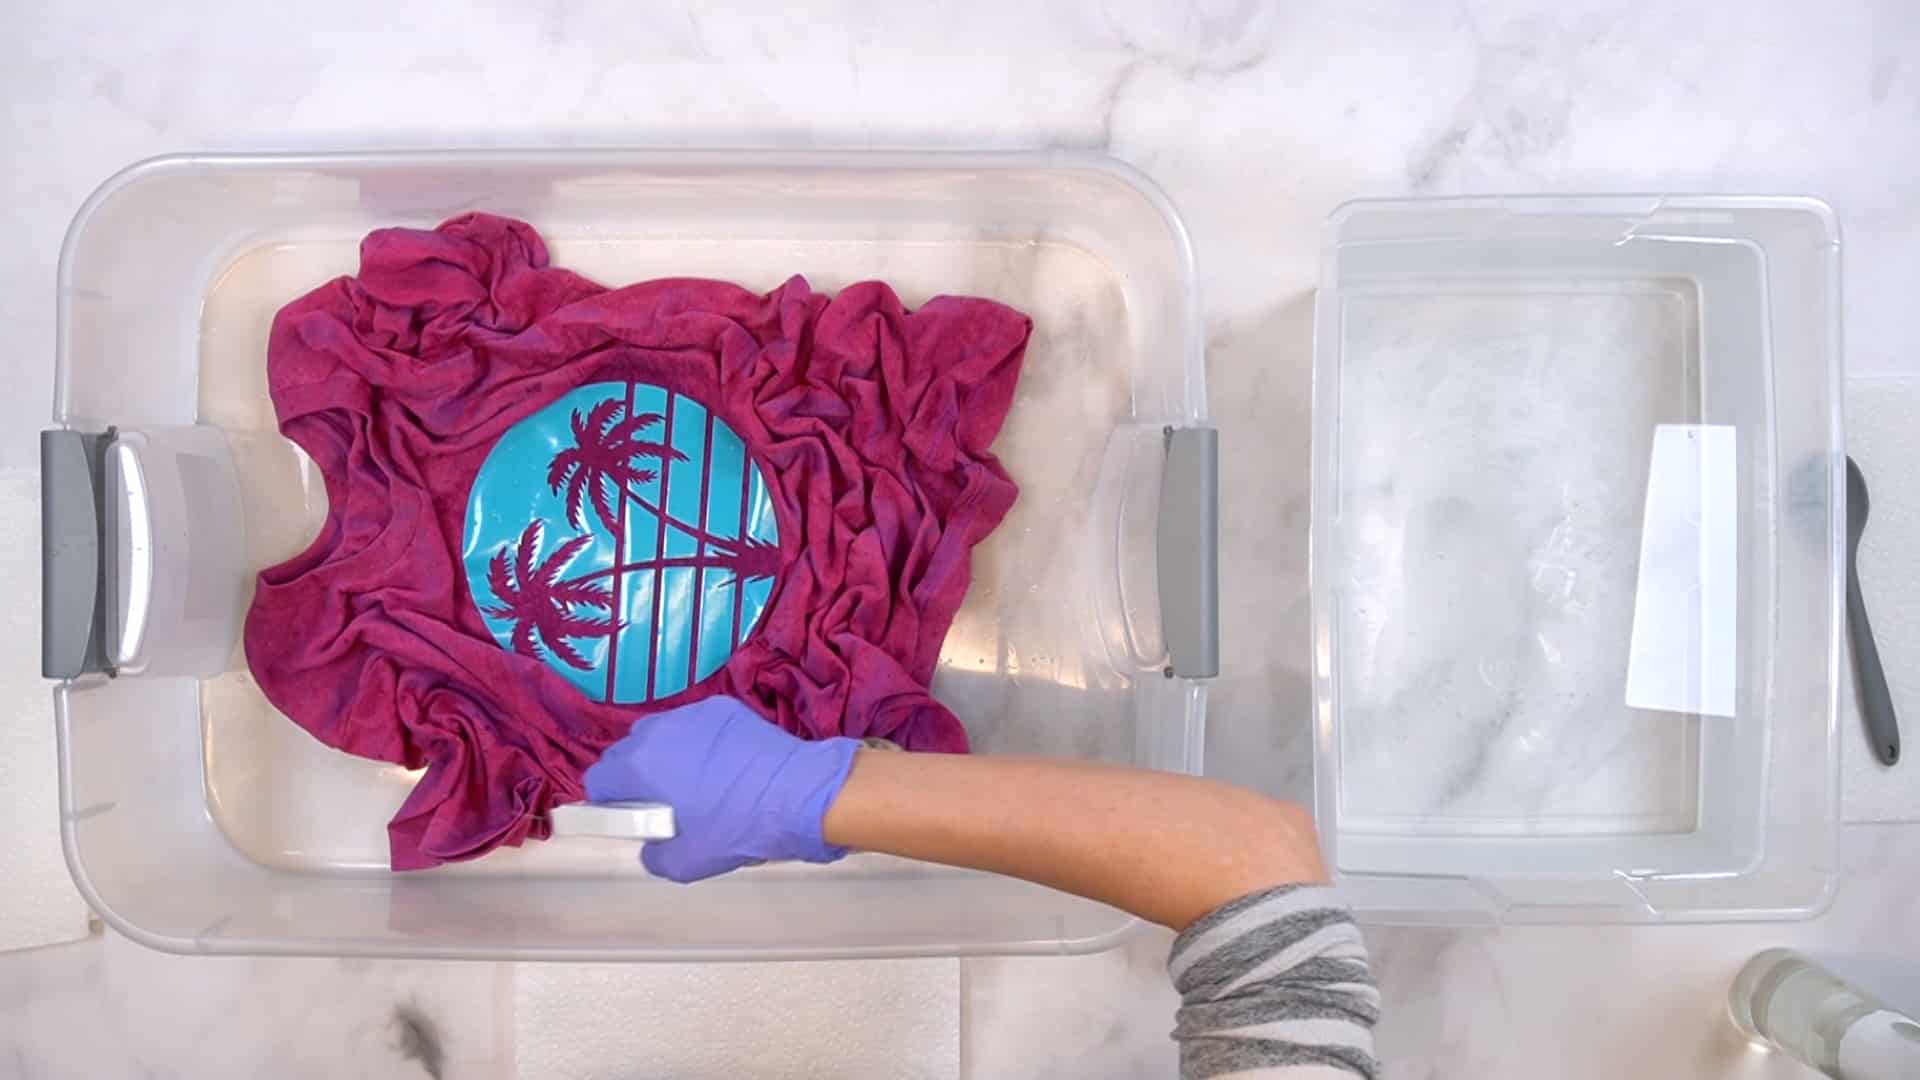 Hands wearing purple gloves spraying bleach solution on a partially bleached magenta shirt in a plastic tub